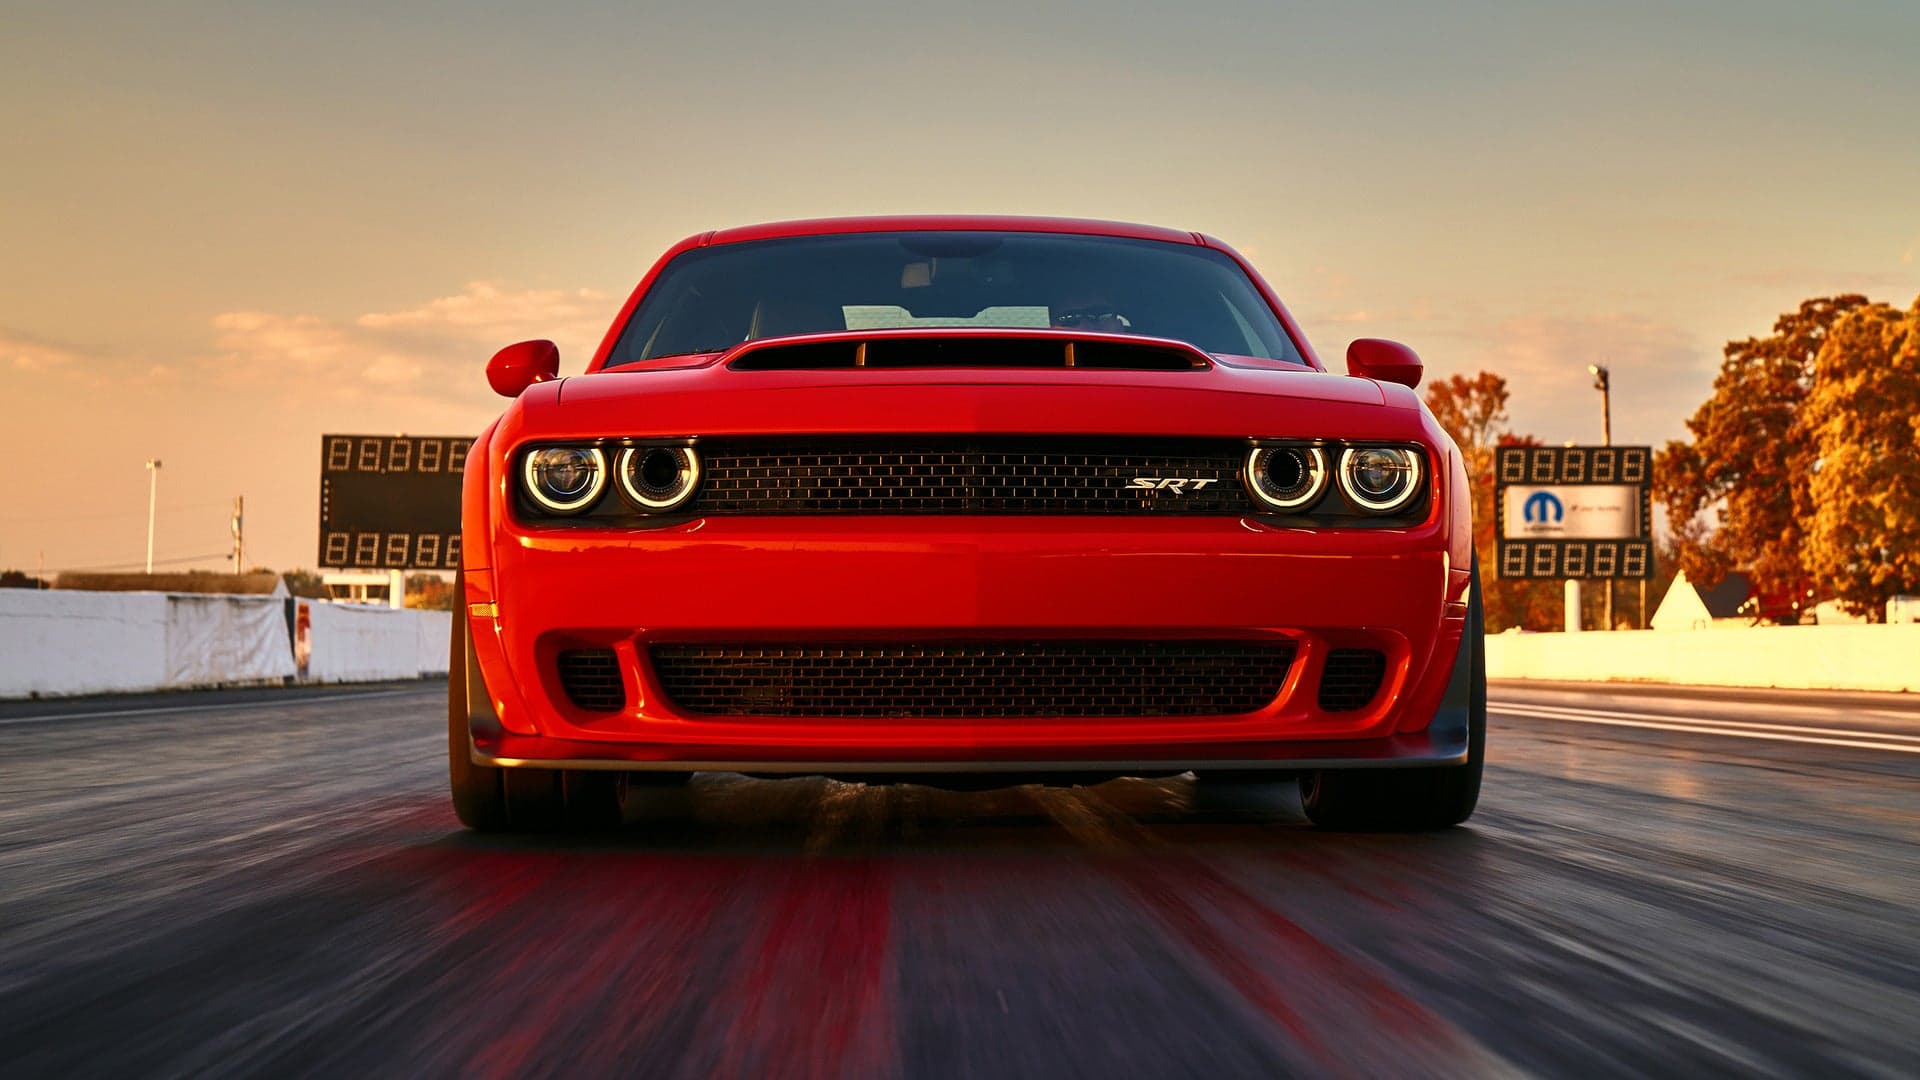 This $180,000 New/Used Dodge Demon Is Priced High Enough to Make Your Skin Crawl